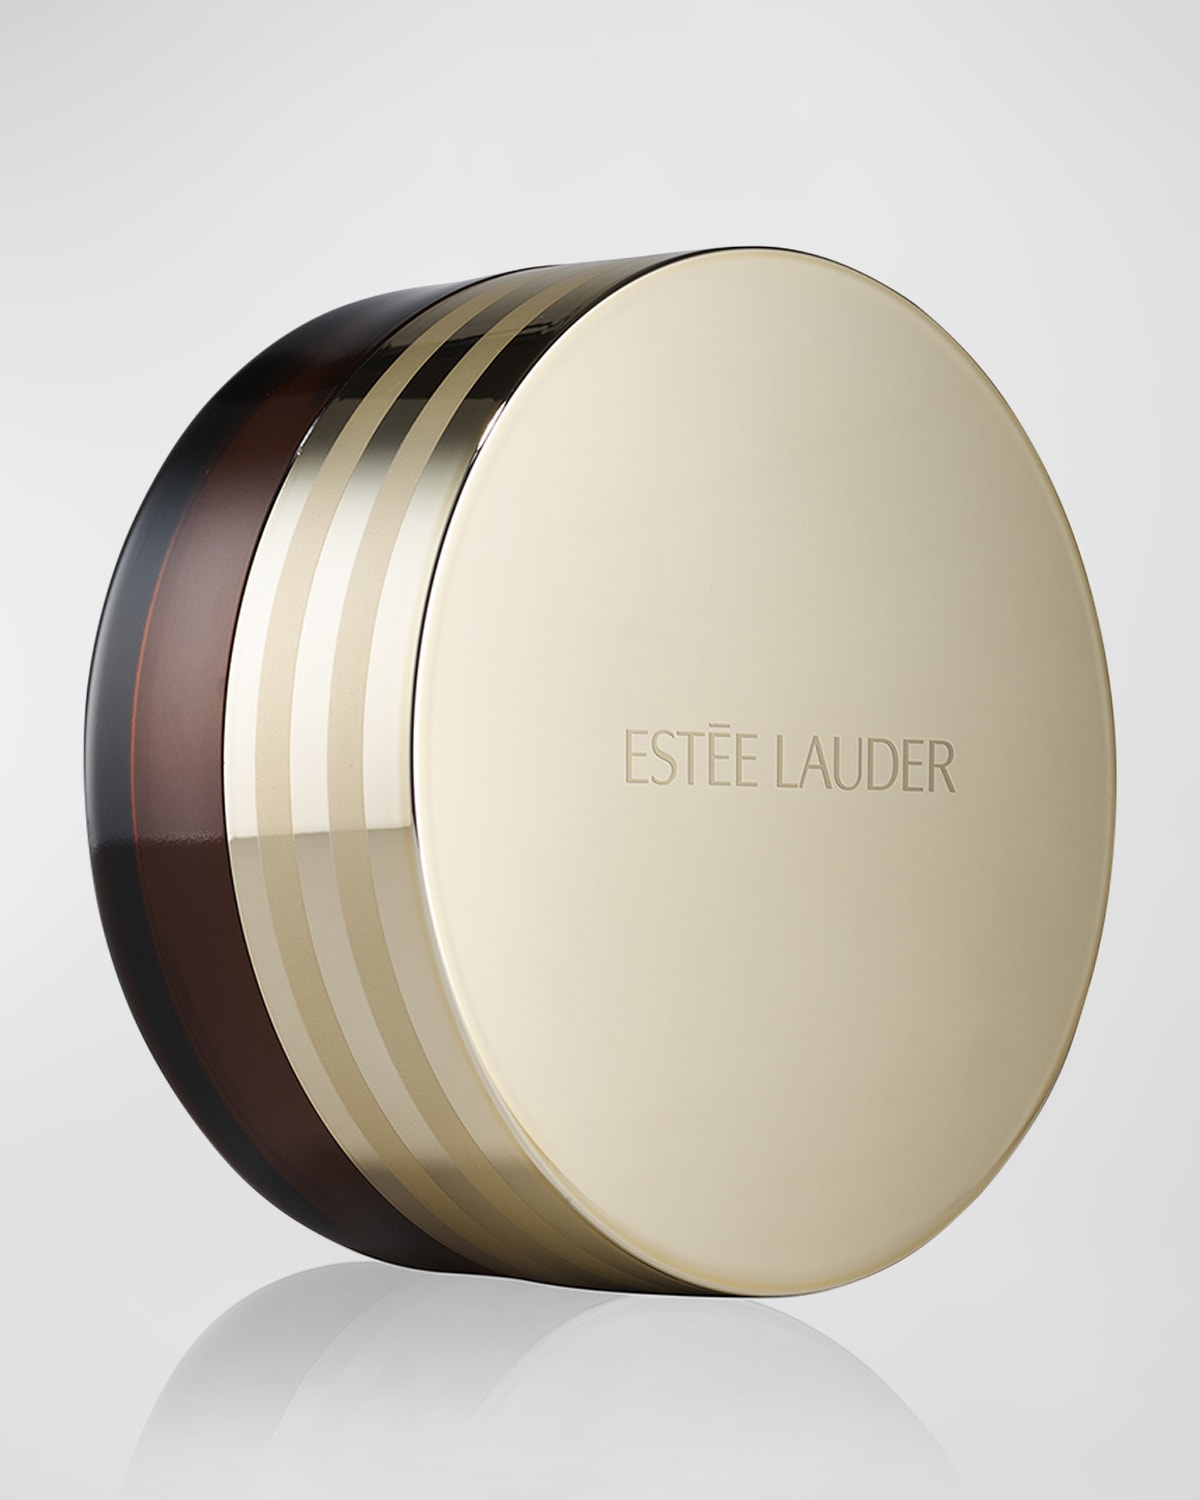 Advanced Night Cleansing Balm with Lipid Rich Oil-Infusion